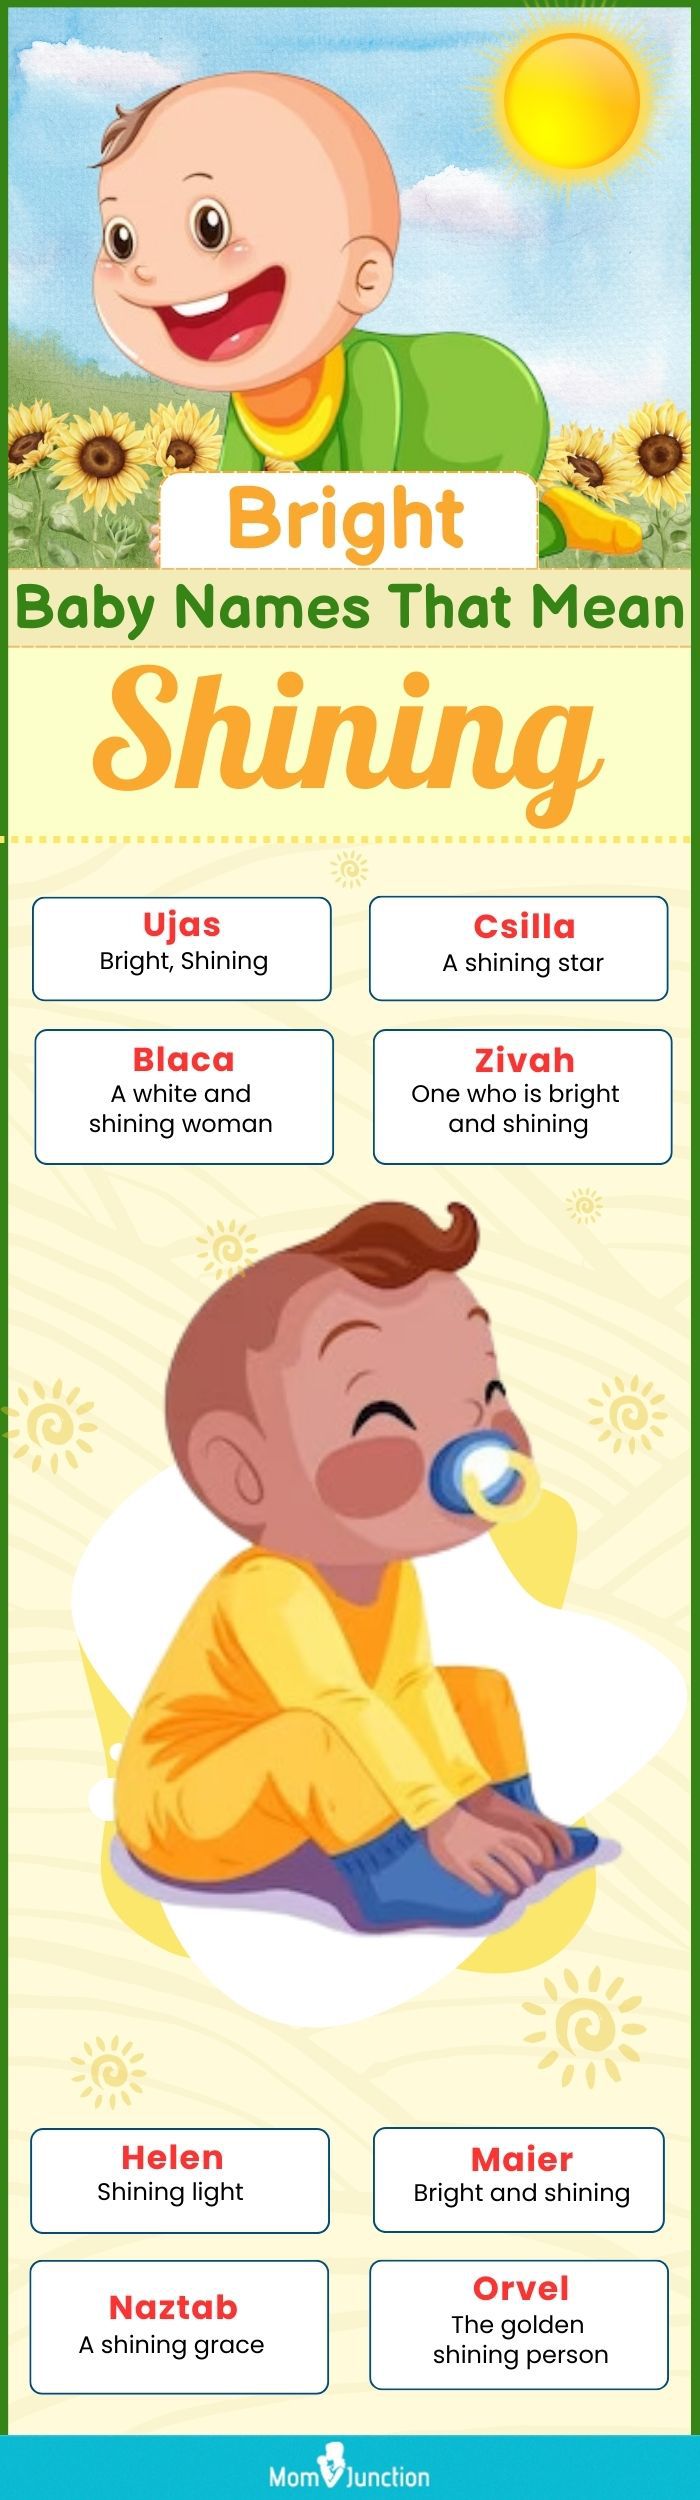 bright baby names that mean shining (infographic)